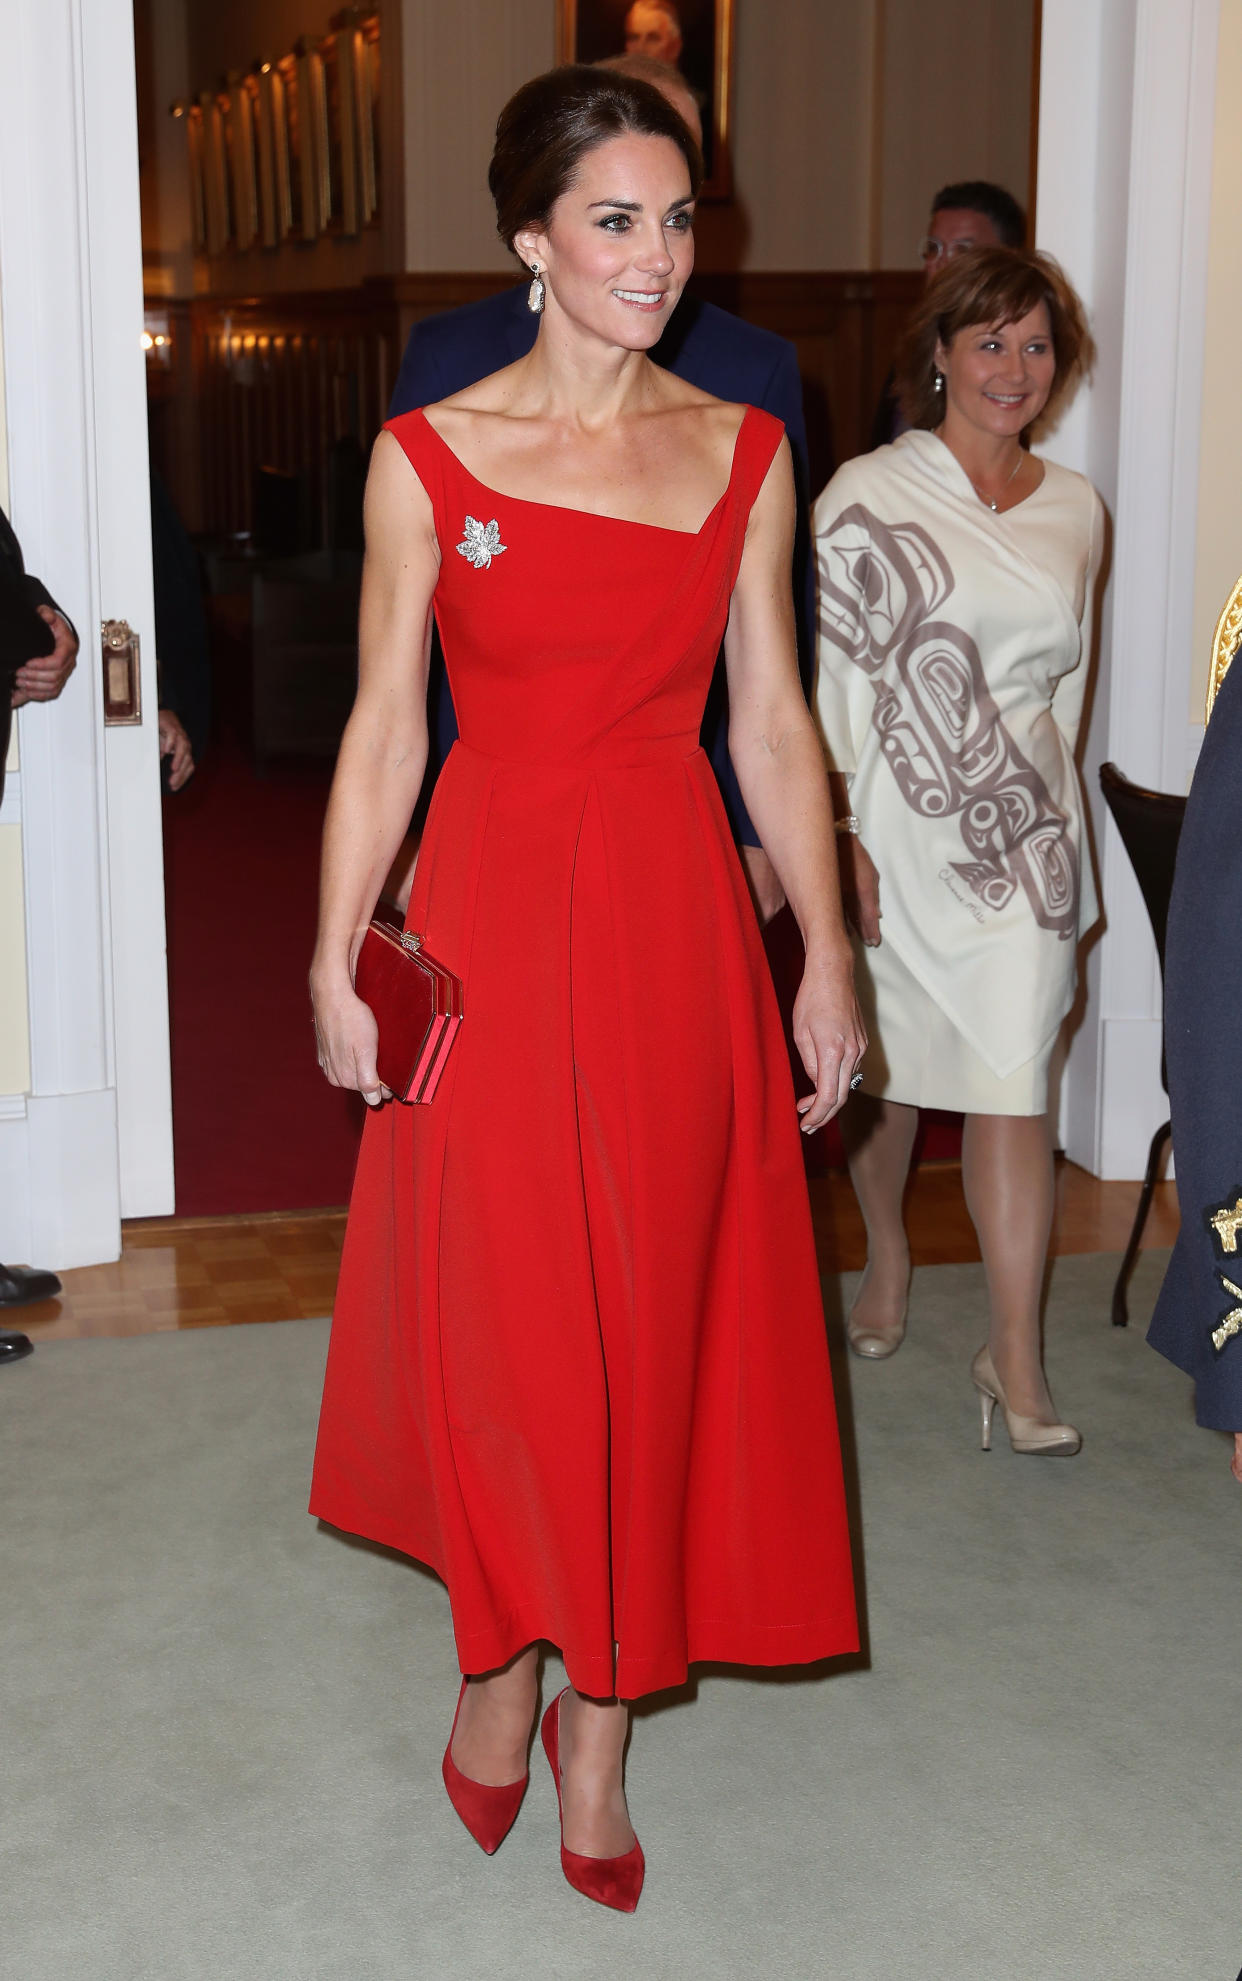 The Princess of Wales wears a midi red dress to an engagement in Canada in 2016. (Getty Images)